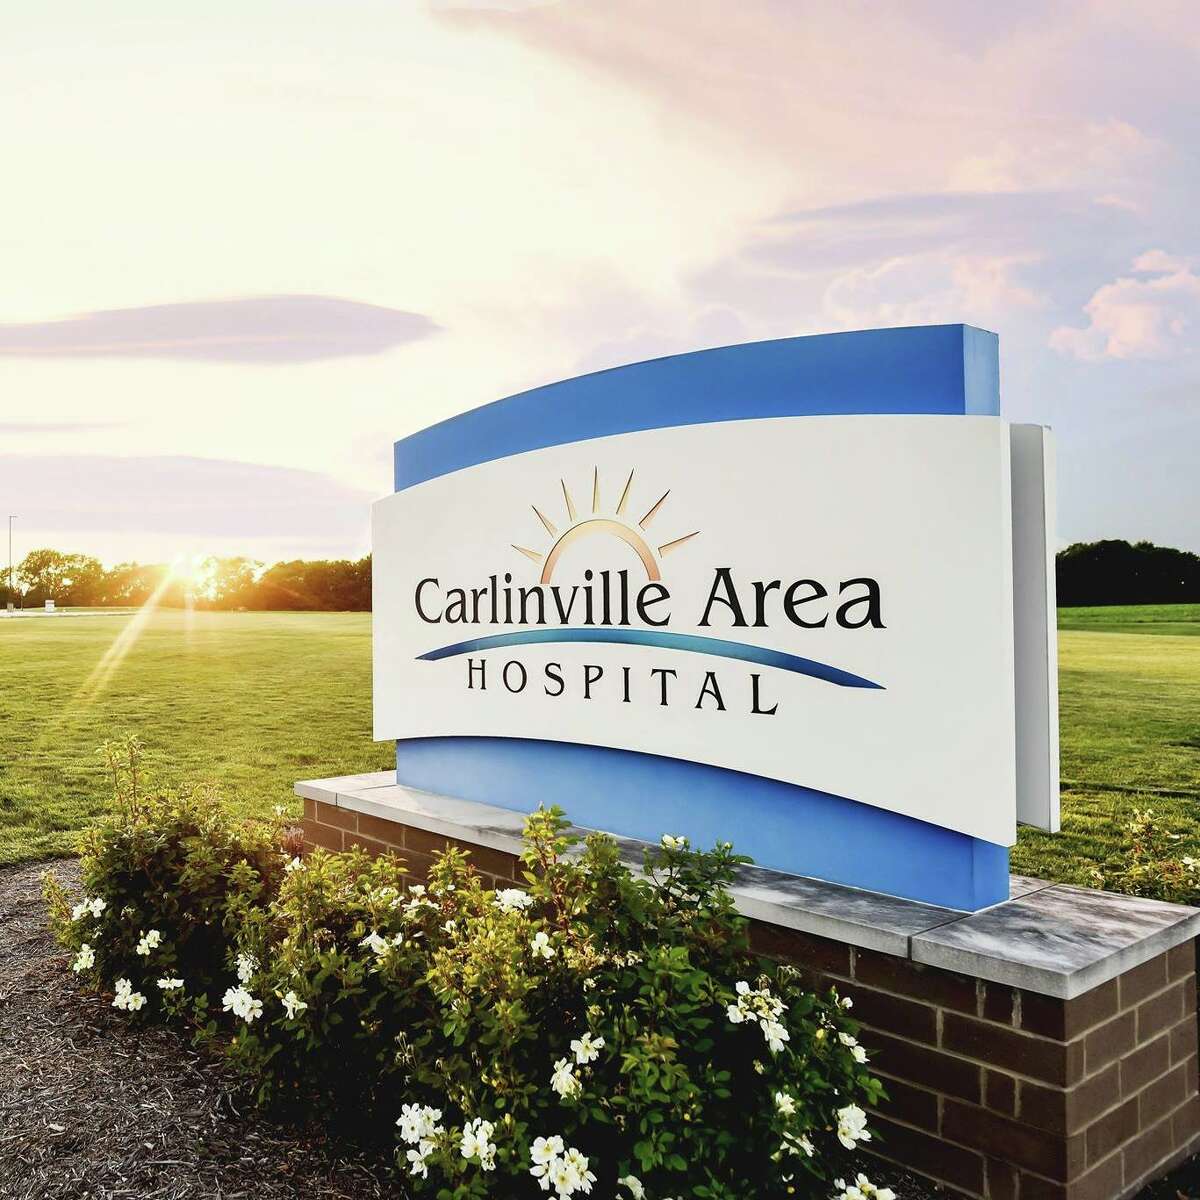 The June 30 deadline is approaching for the Carlinville Area Hospital Auxiliary brick orders.